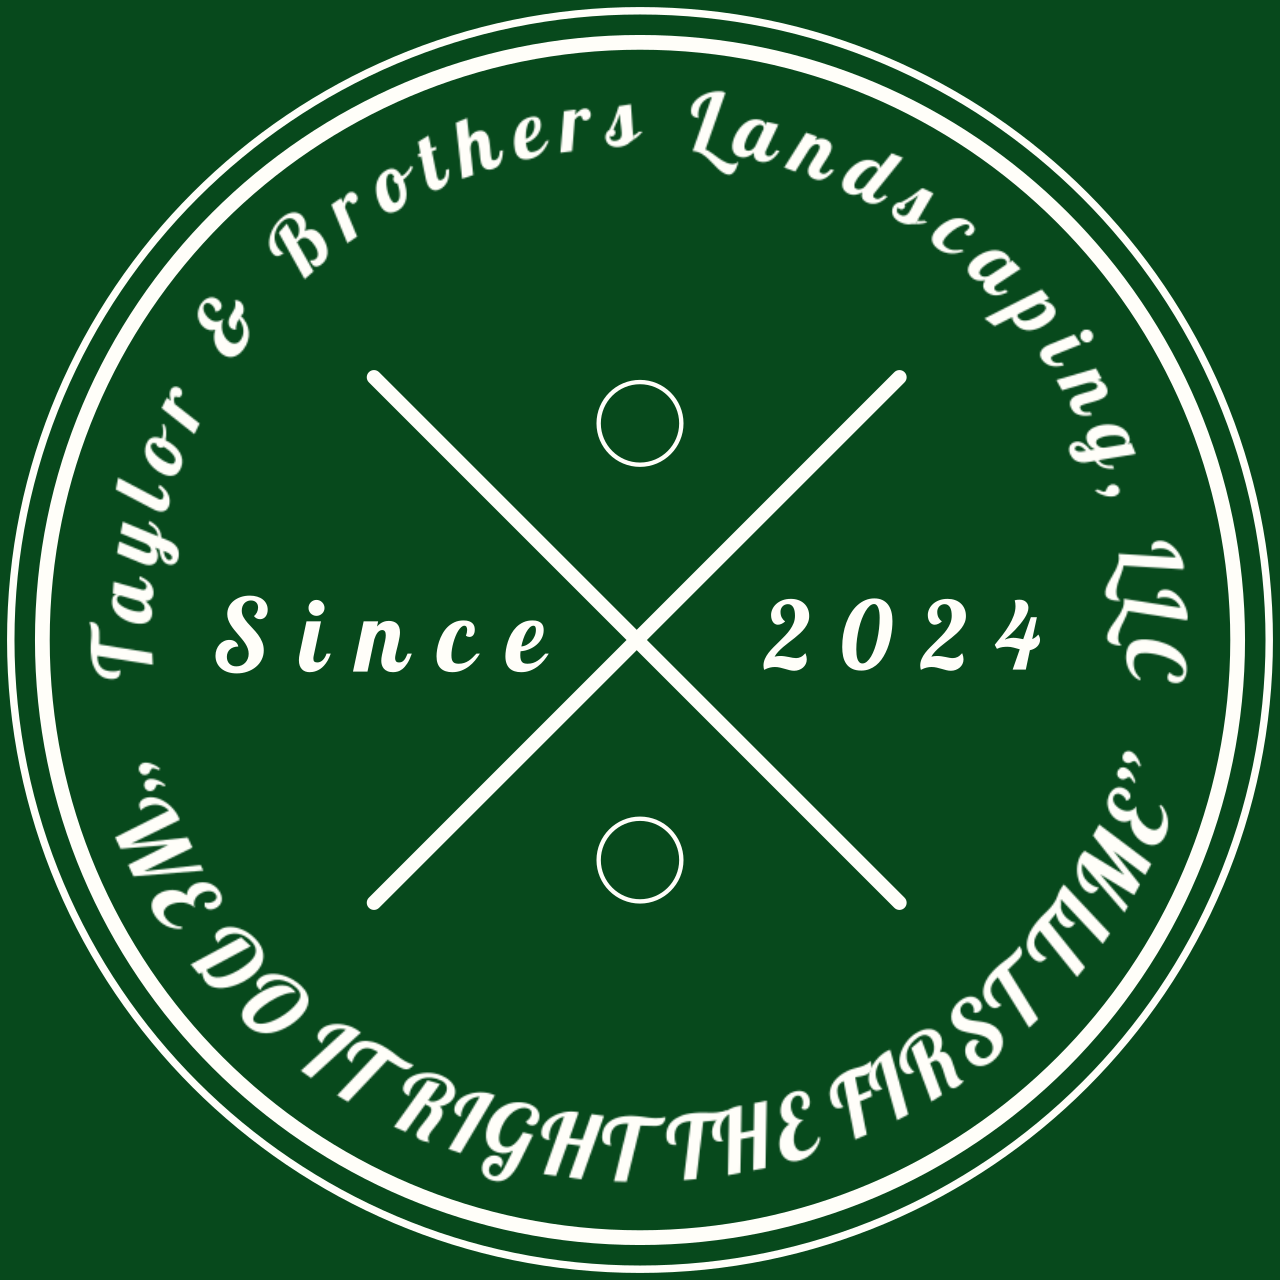 Taylor & Brothers Landscaping, LLC's logo